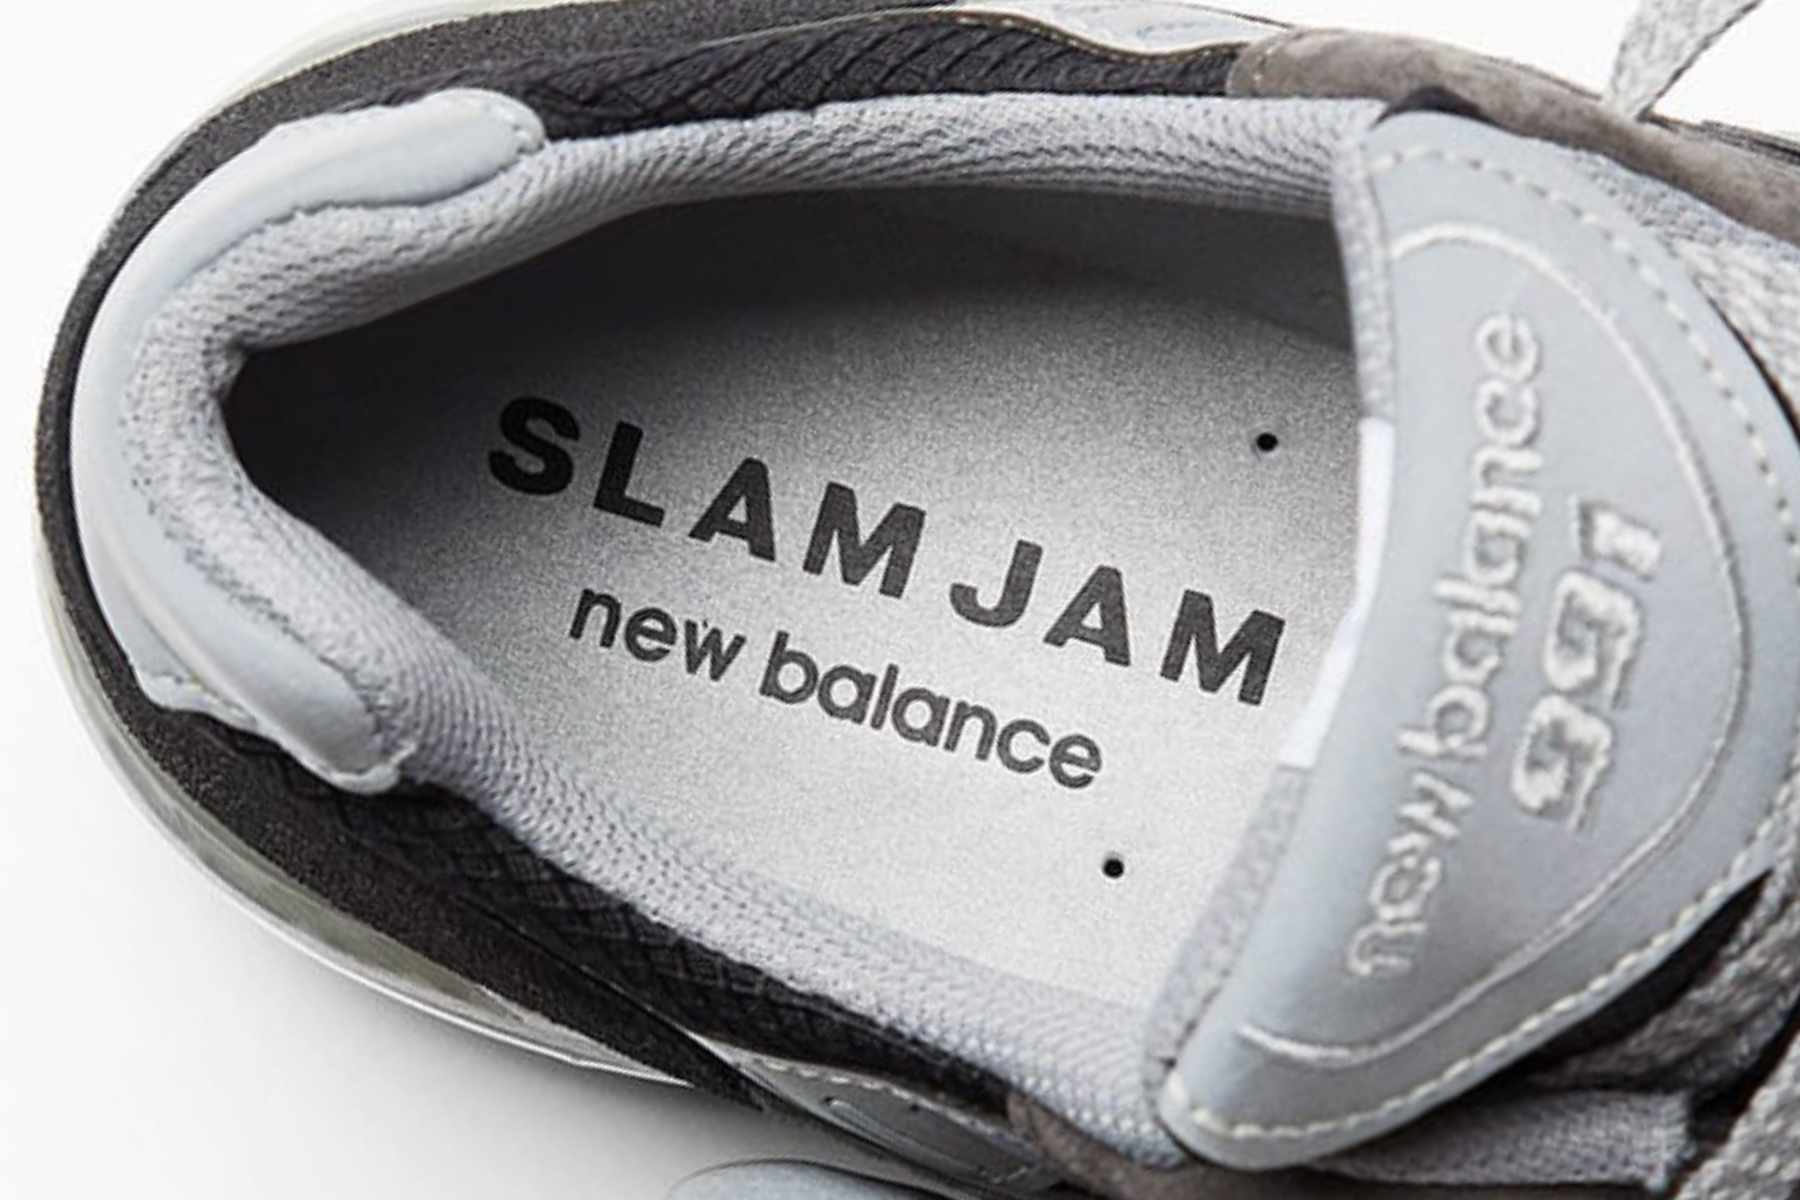 This season Slam Jam is releasing another take on the New Balance 991v2.